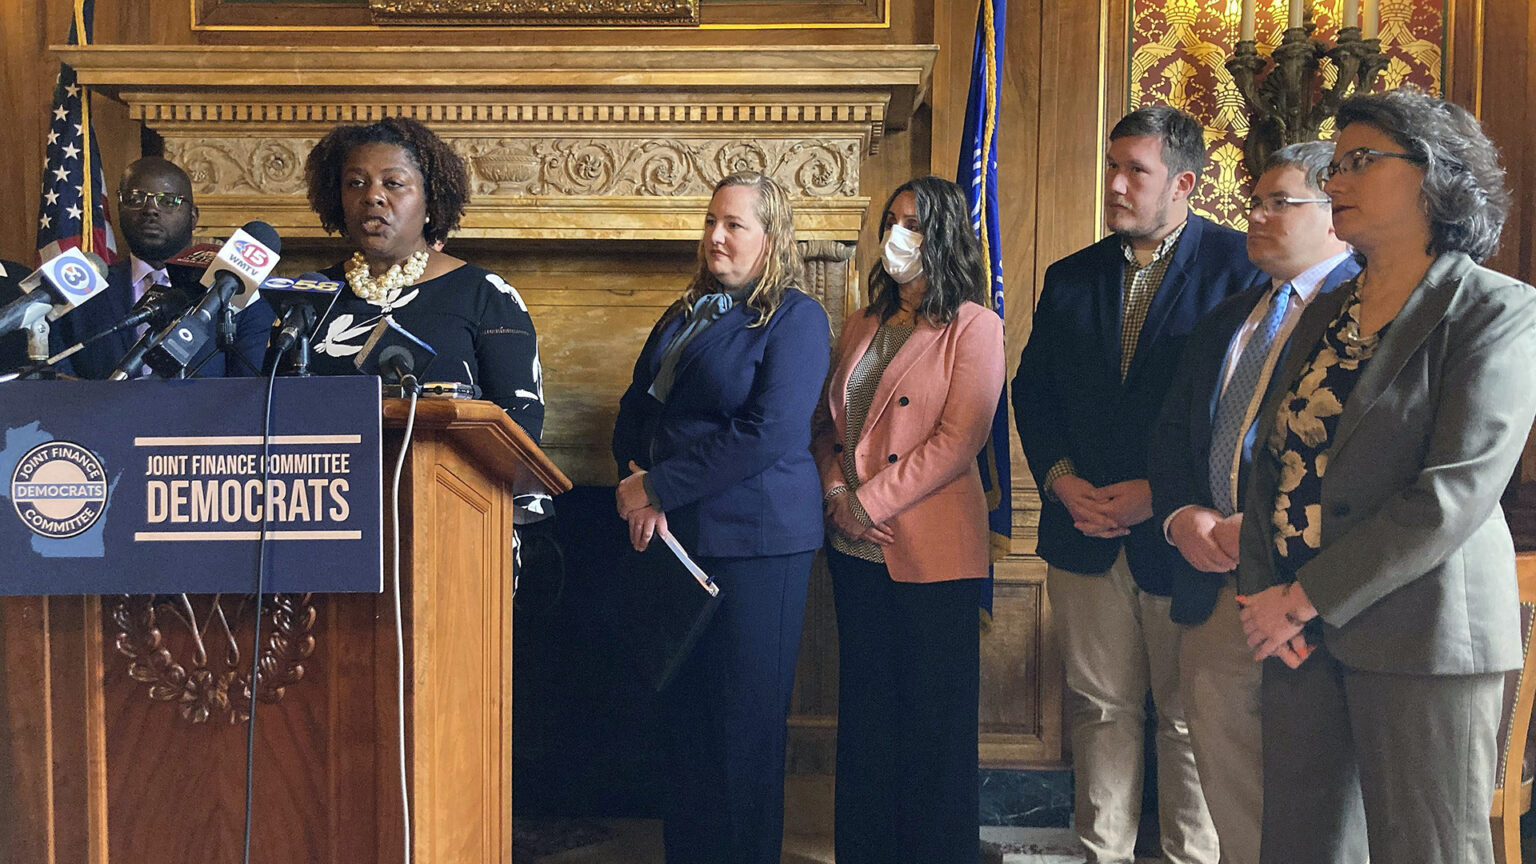 LaTonya Johnson stands at a podium with a sign with the words Joint Finance Committee Democrats and speaks into multiple microphones, with other people standing behind her in a room with gilt toile wallpaper, a carved wood mantel for a fireplace, and the U.S. and Wisconsin flags.